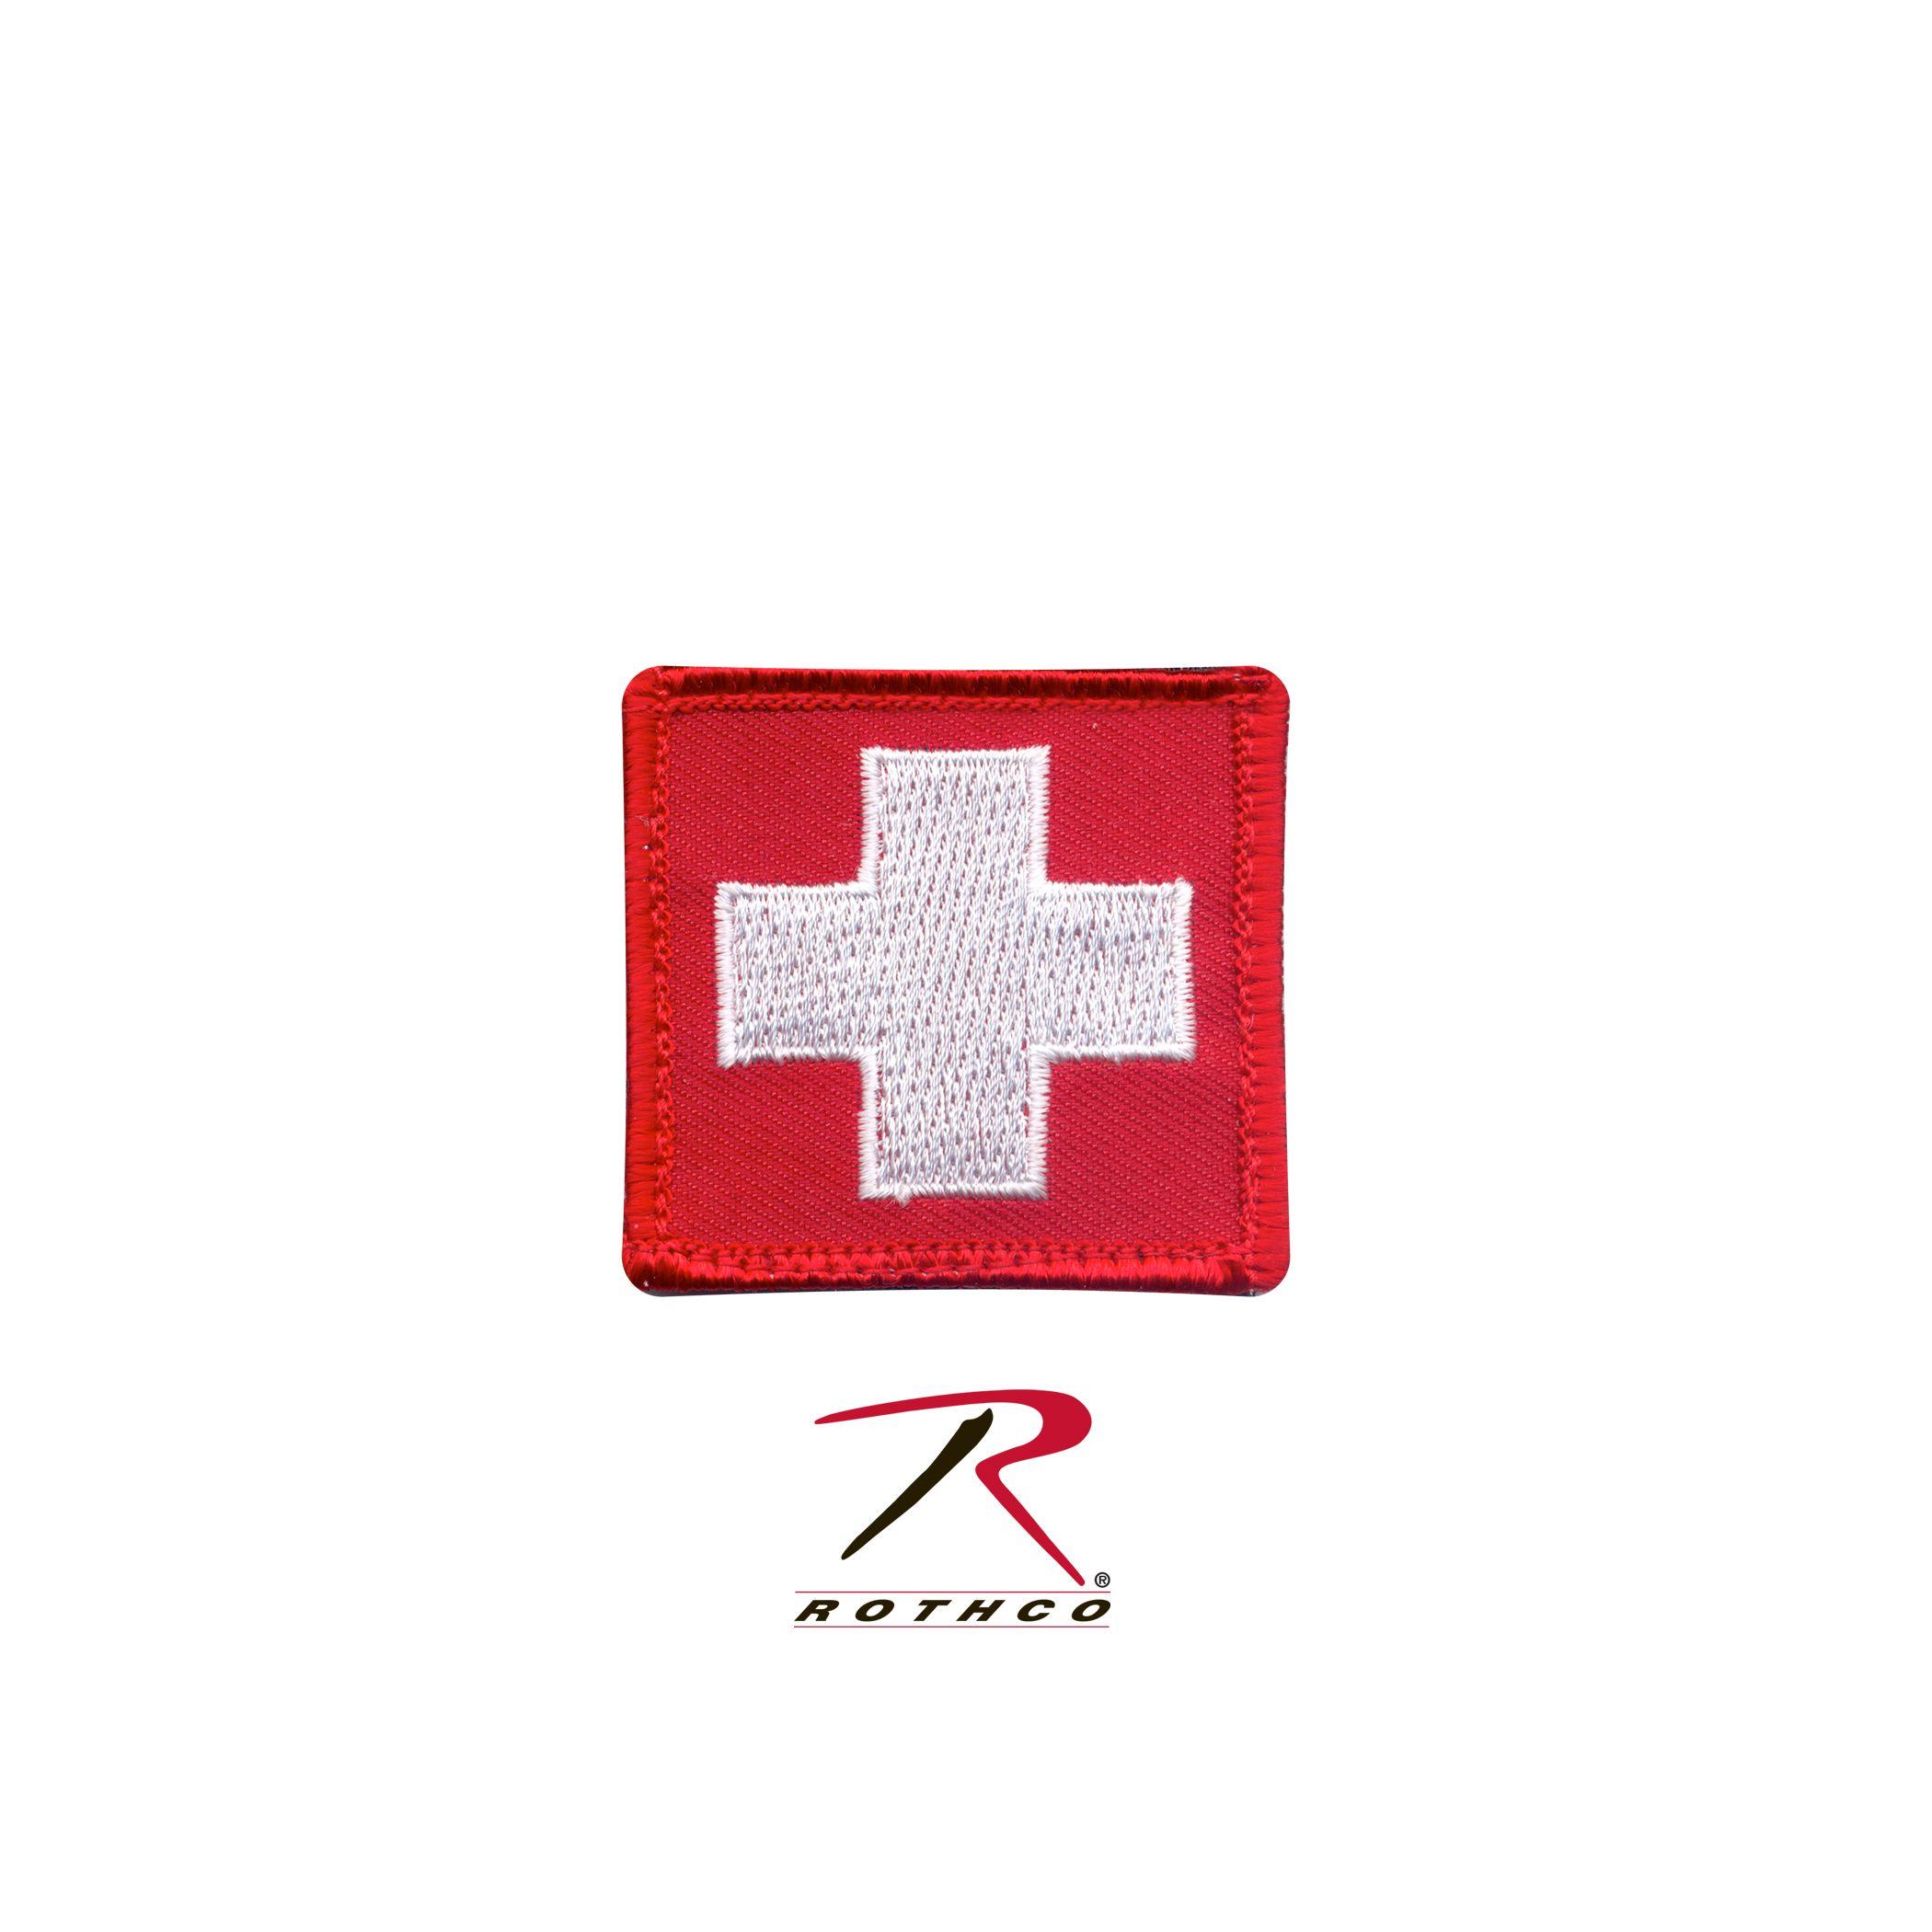 Square White with Red Cross Logo - Red square white cross Logos